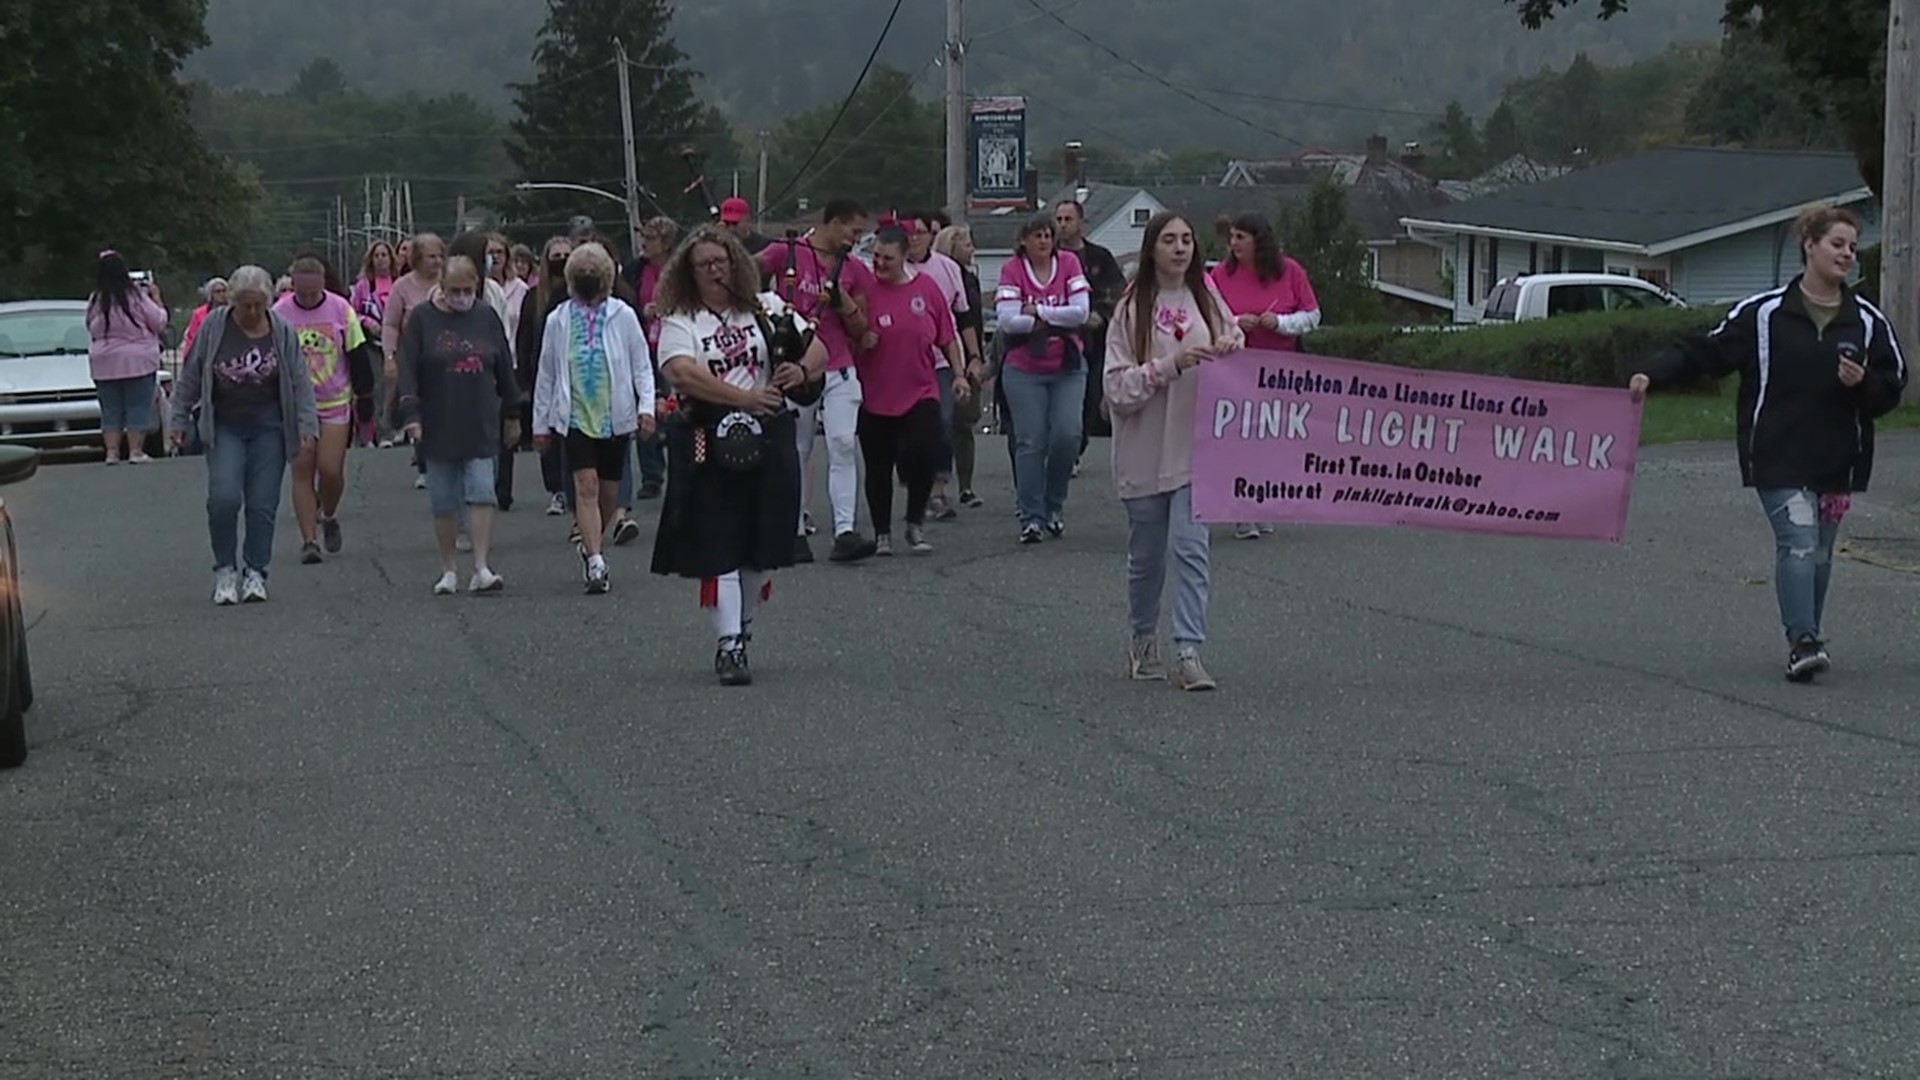 This was the 16th annual Pink Light Walk in Lehighton.